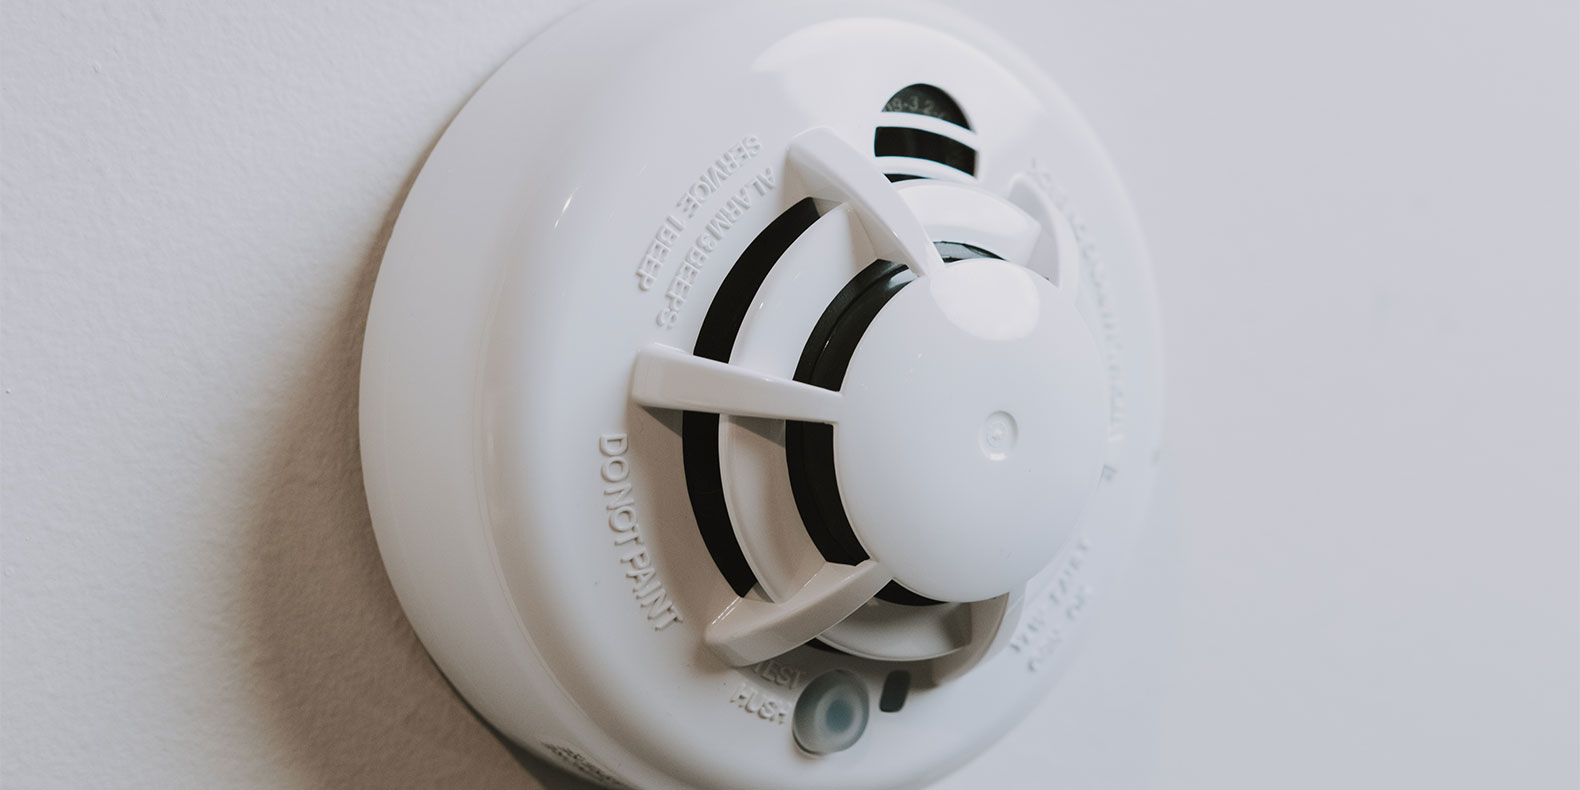 How To Turn Off Smoke Detector How to Stop Smoke Detectors from Beeping